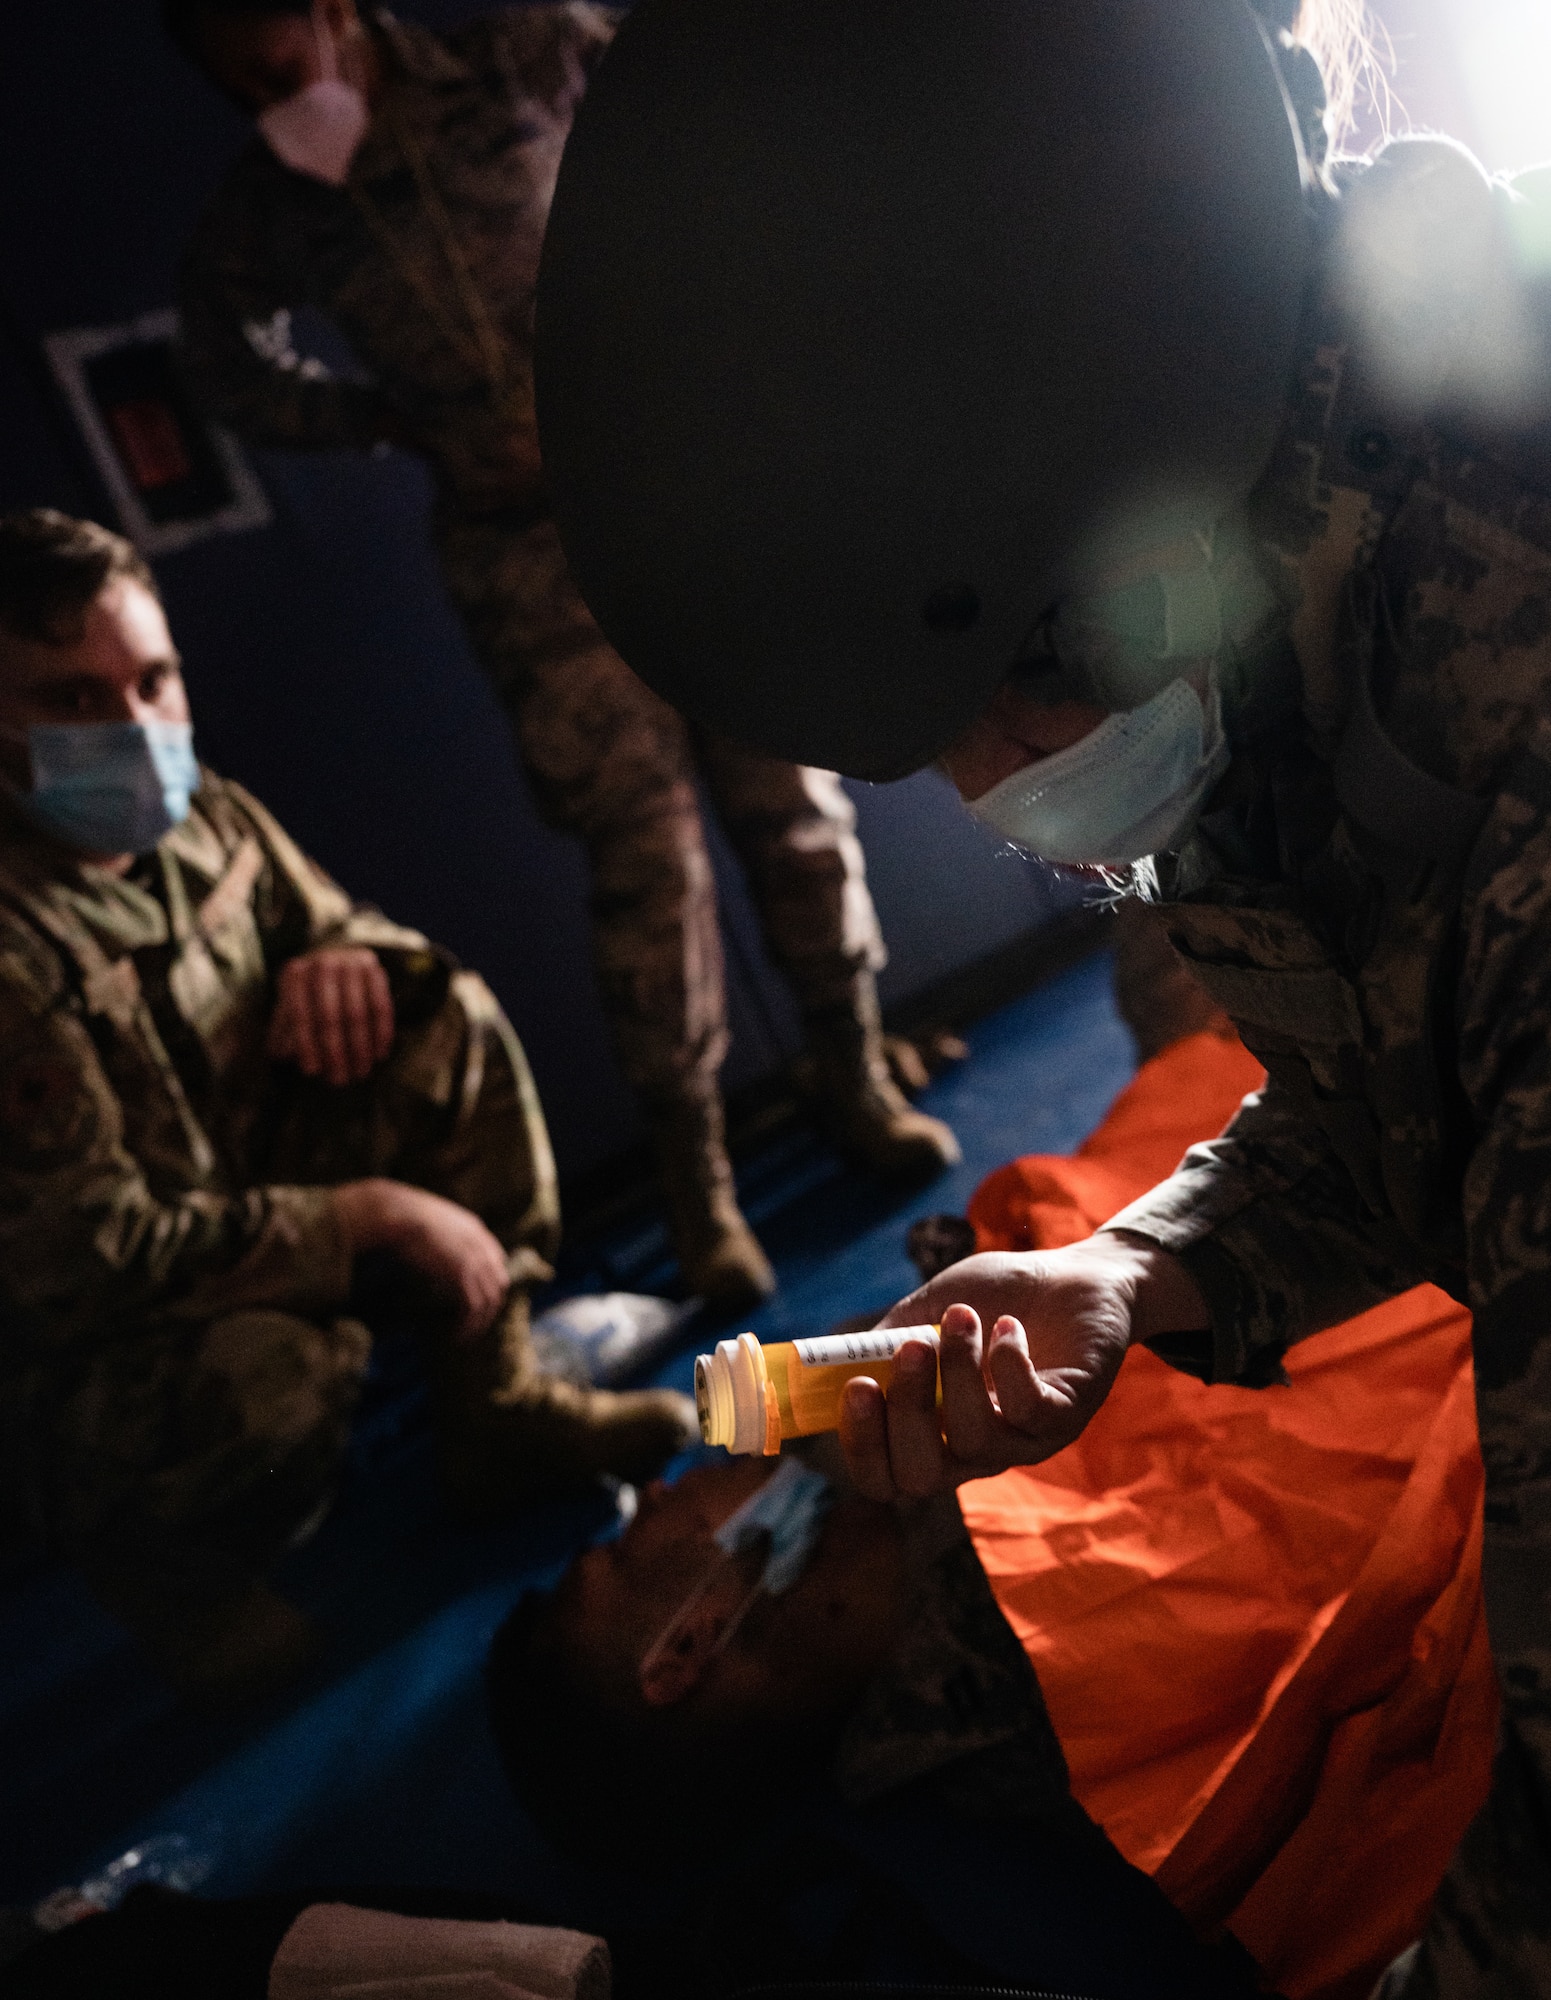 U.S. Air Force Capt. Amber Gibbons, 17th Operational Medical Readiness Squadron officer in charge of the student clinic, examines a prop prescription bottle while assessing a patient during the final exercise of the Tactical Combat Casualty Care course at the Mathis Fitness Center on Goodfellow Air Force Base, Texas, Feb. 7, 2021. During the exercise, candy was used to imitate the combat pill pack, which allowed the medics to administer the needed ‘medication’ based on simulated injuries. (U.S. Air Force photo by Senior Airman Deven Schultz)